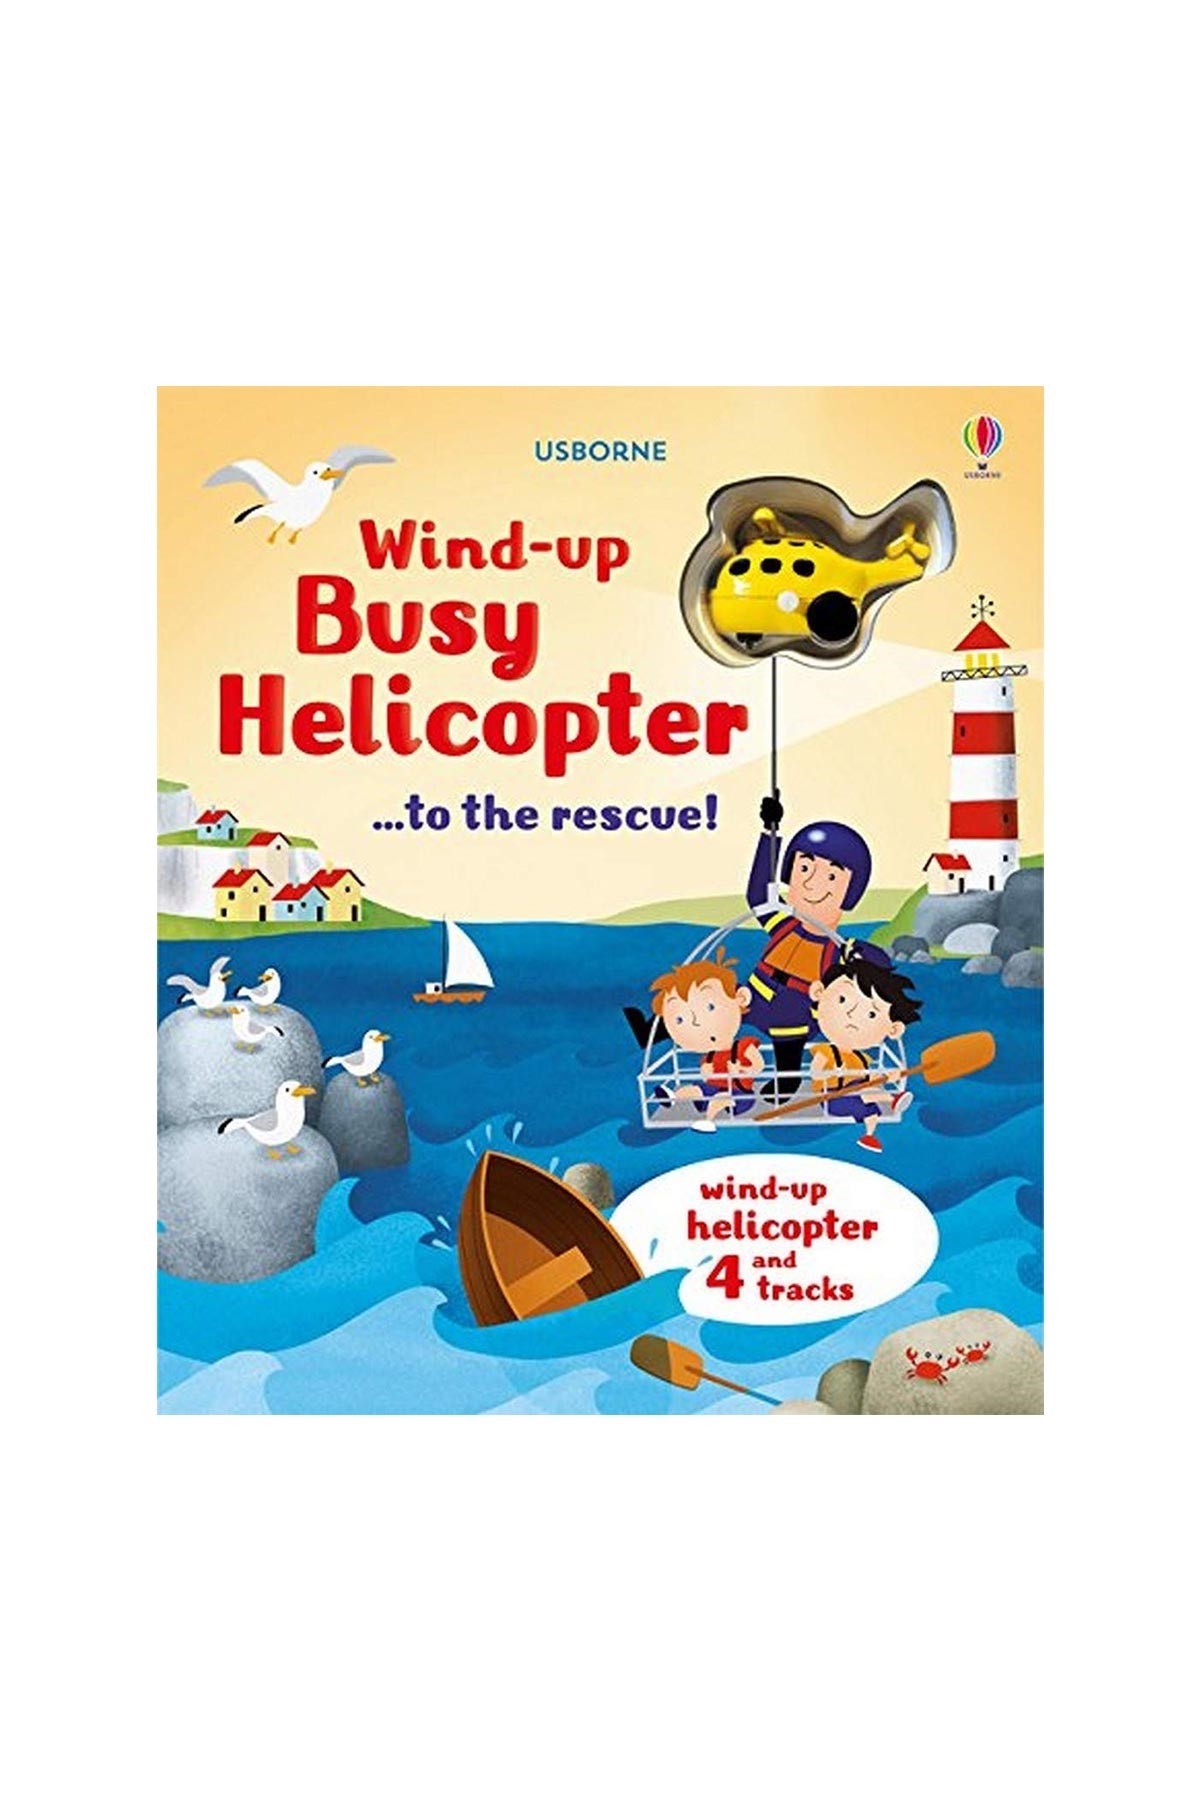 The Usborne Wind-up Busy Helicopter Book